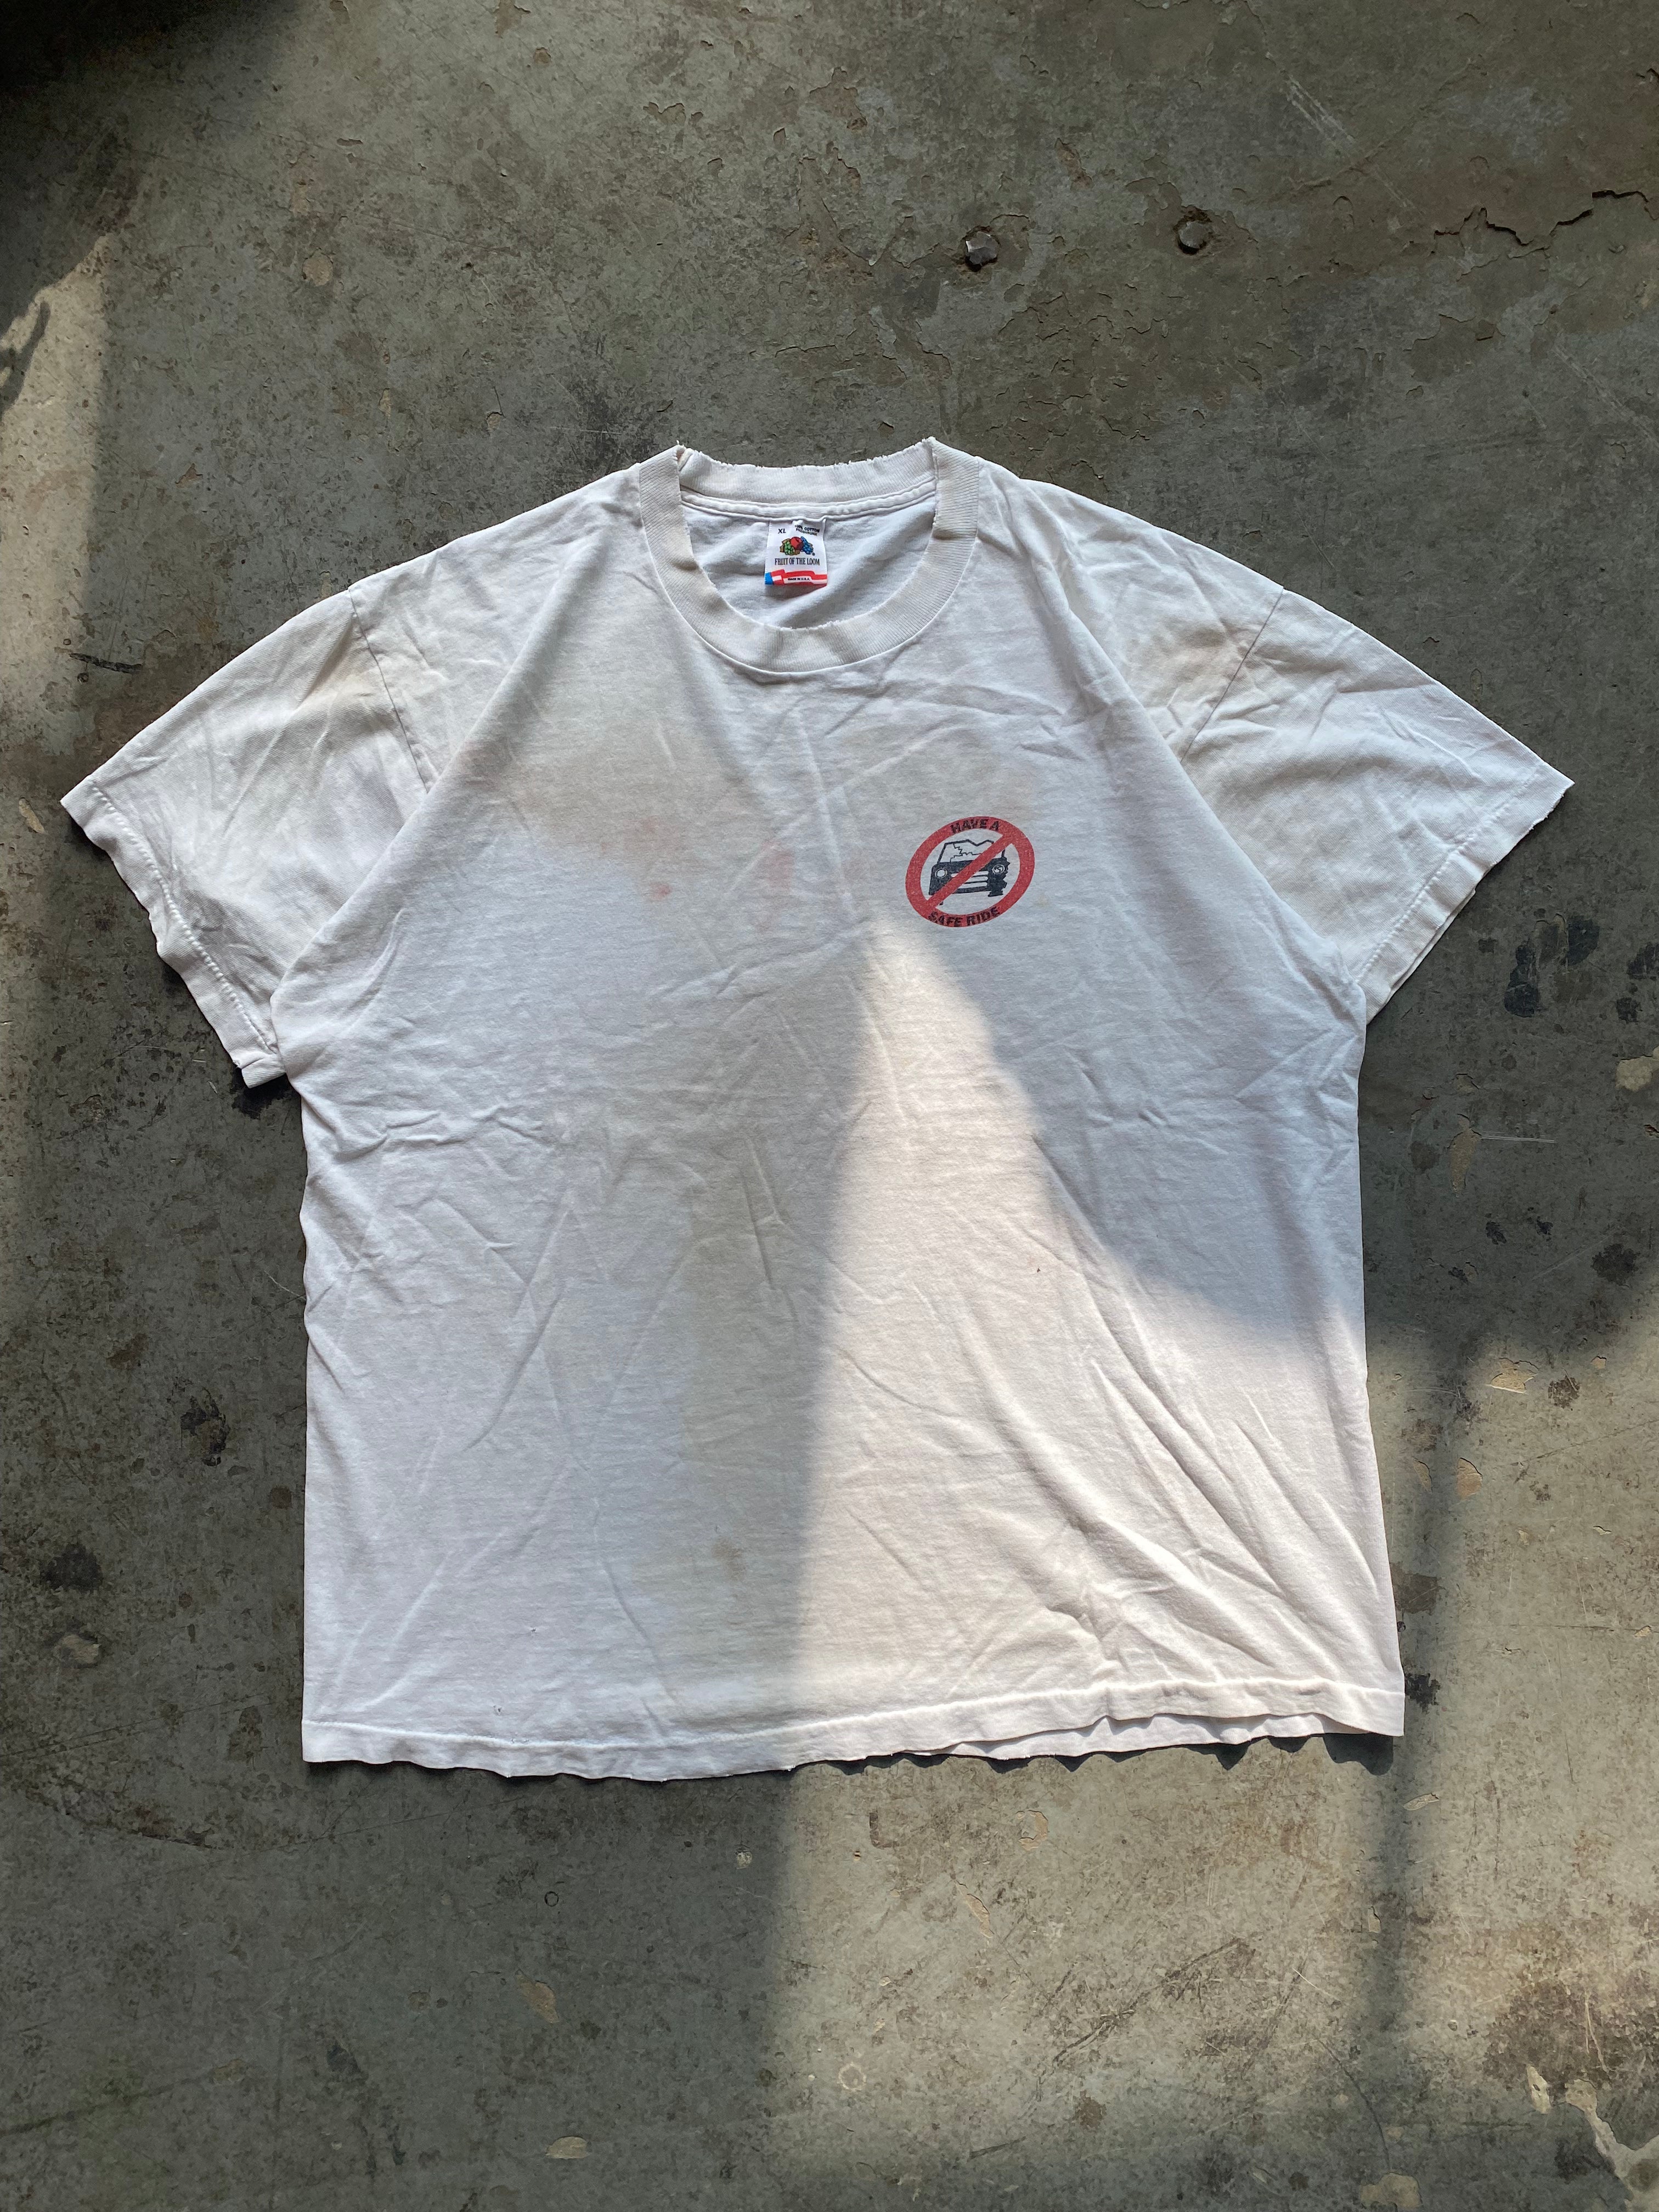 1988 Have a Safe Ride Distressed/Worn T-Shirt (XL)